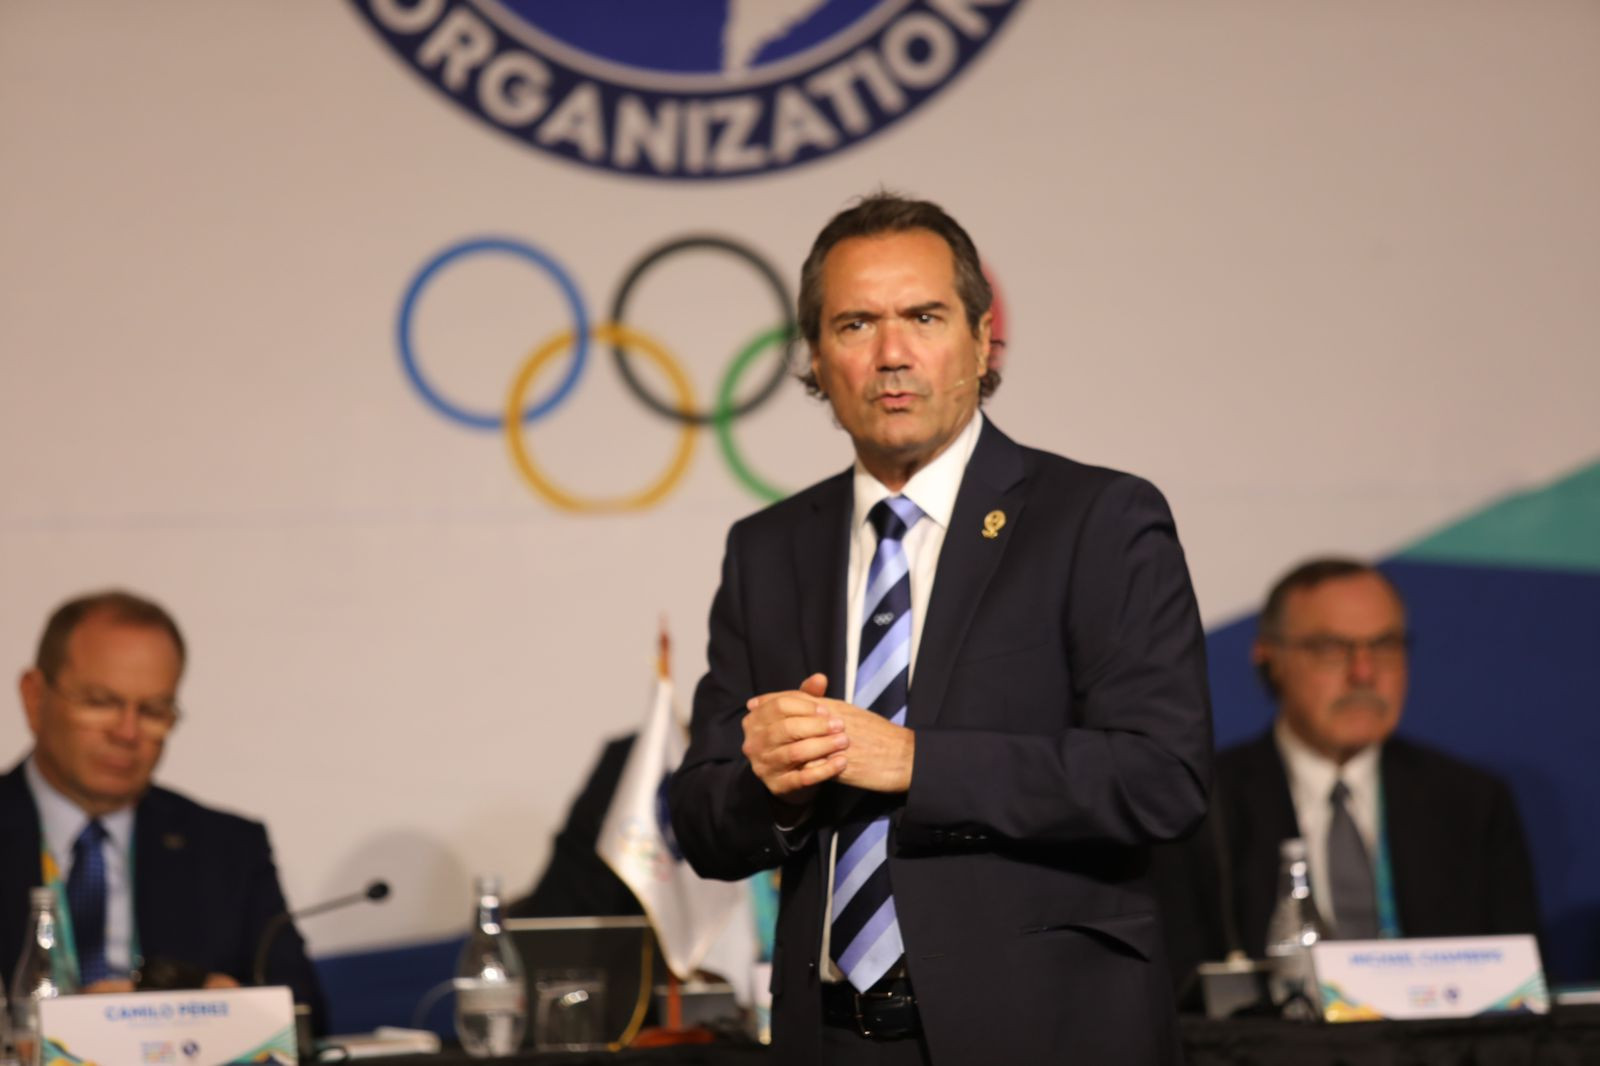 Panam Sports President Neven Ilic admitted that "a lot of sports are not working" in many countries ©Panam Sports